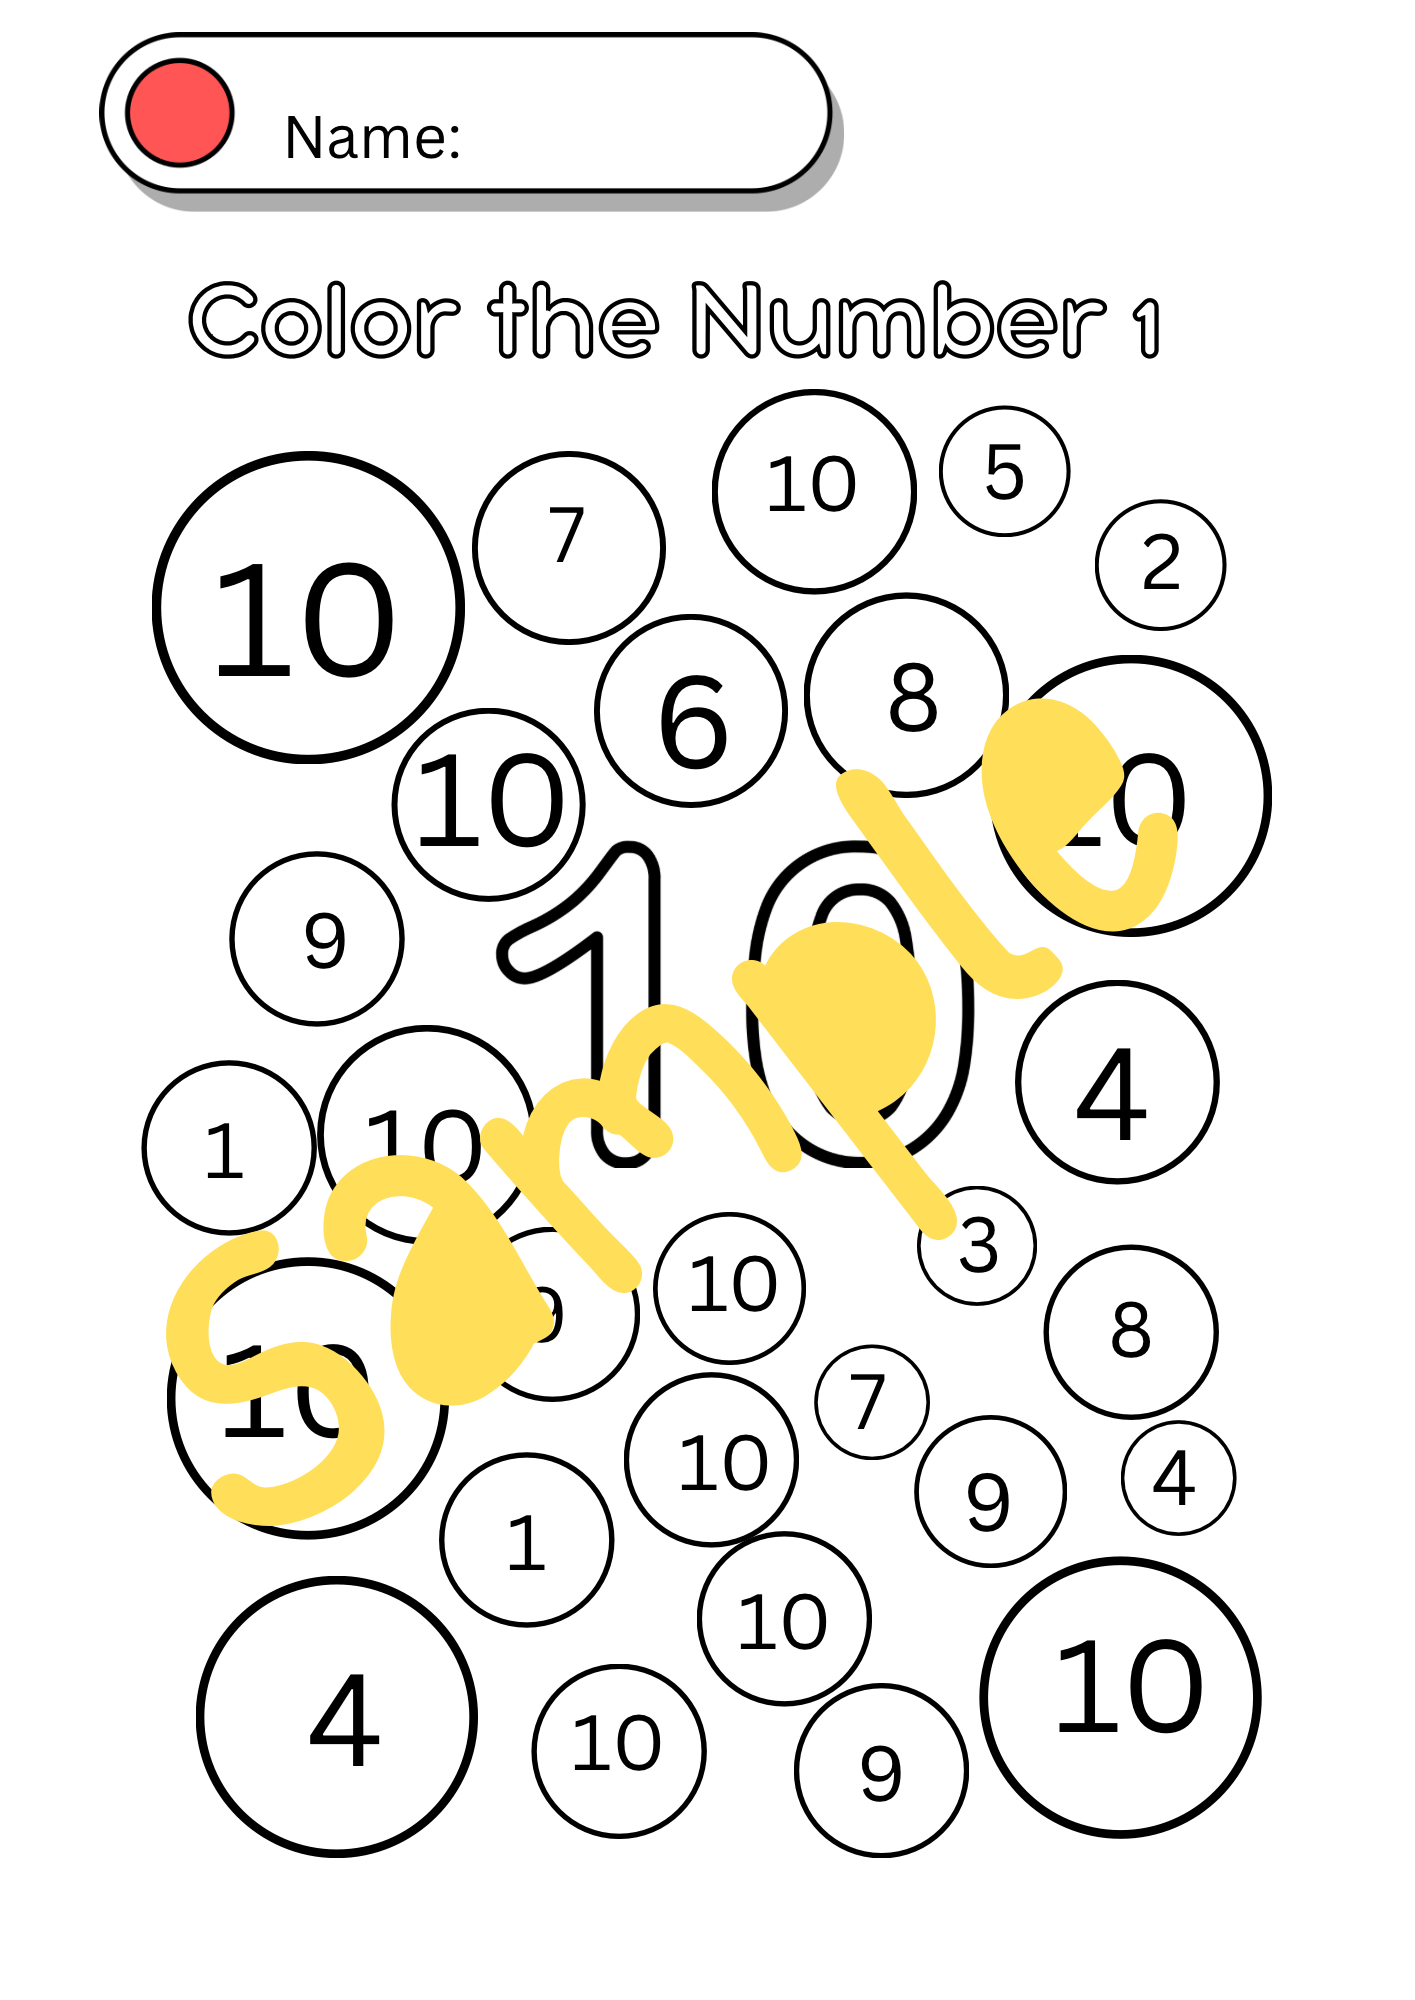 Color by Number: #10